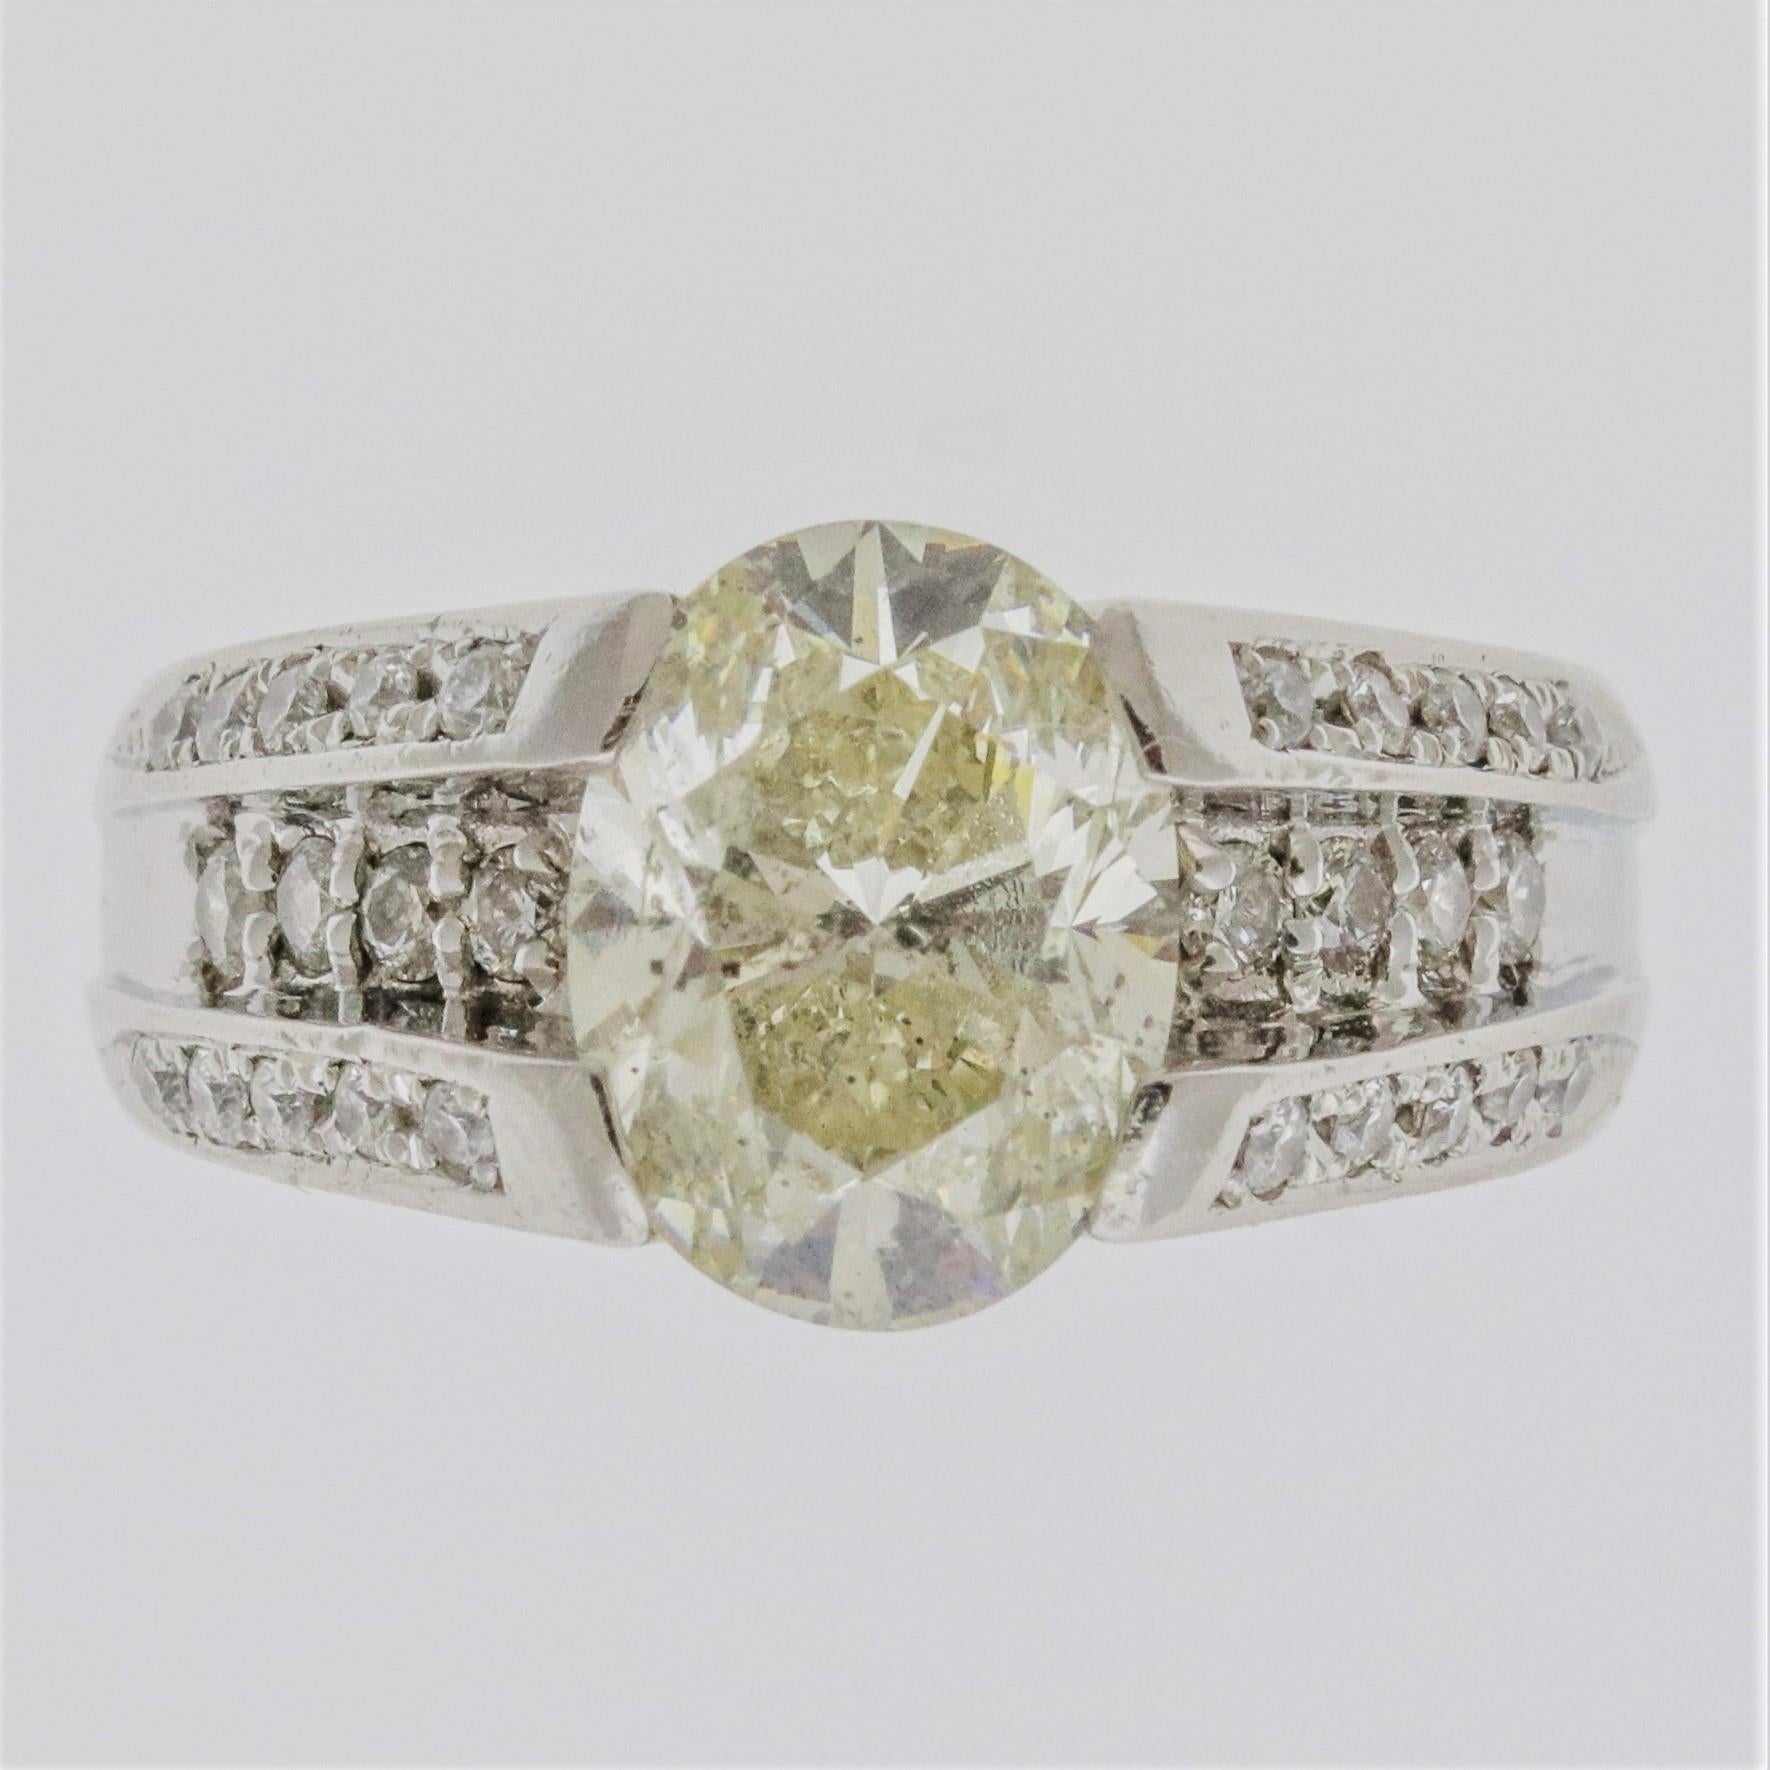 A sleek and stylish ring featuring a 3.01 carat oval shaped diamond! It has a faint yellow color with minimal eye visible inclusions. It is accented by 0.35 carats of additional diamonds set on the sides of the ring. Made in platinum, get this 3